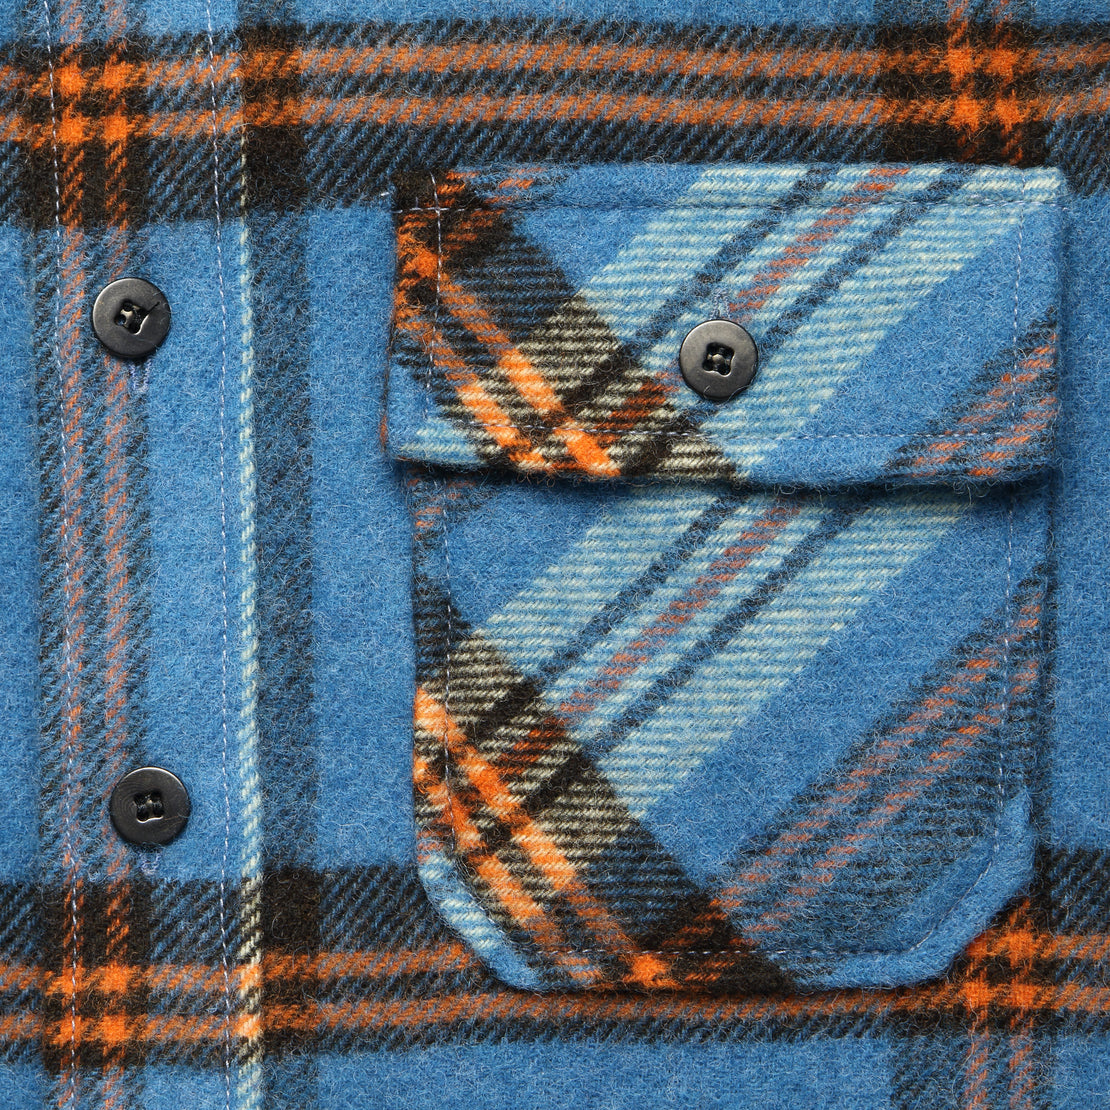 Hall CPO Plaid Wool Overshirt- Teal/Orange - Imogene + Willie - STAG Provisions - Tops - L/S Woven - Overshirt